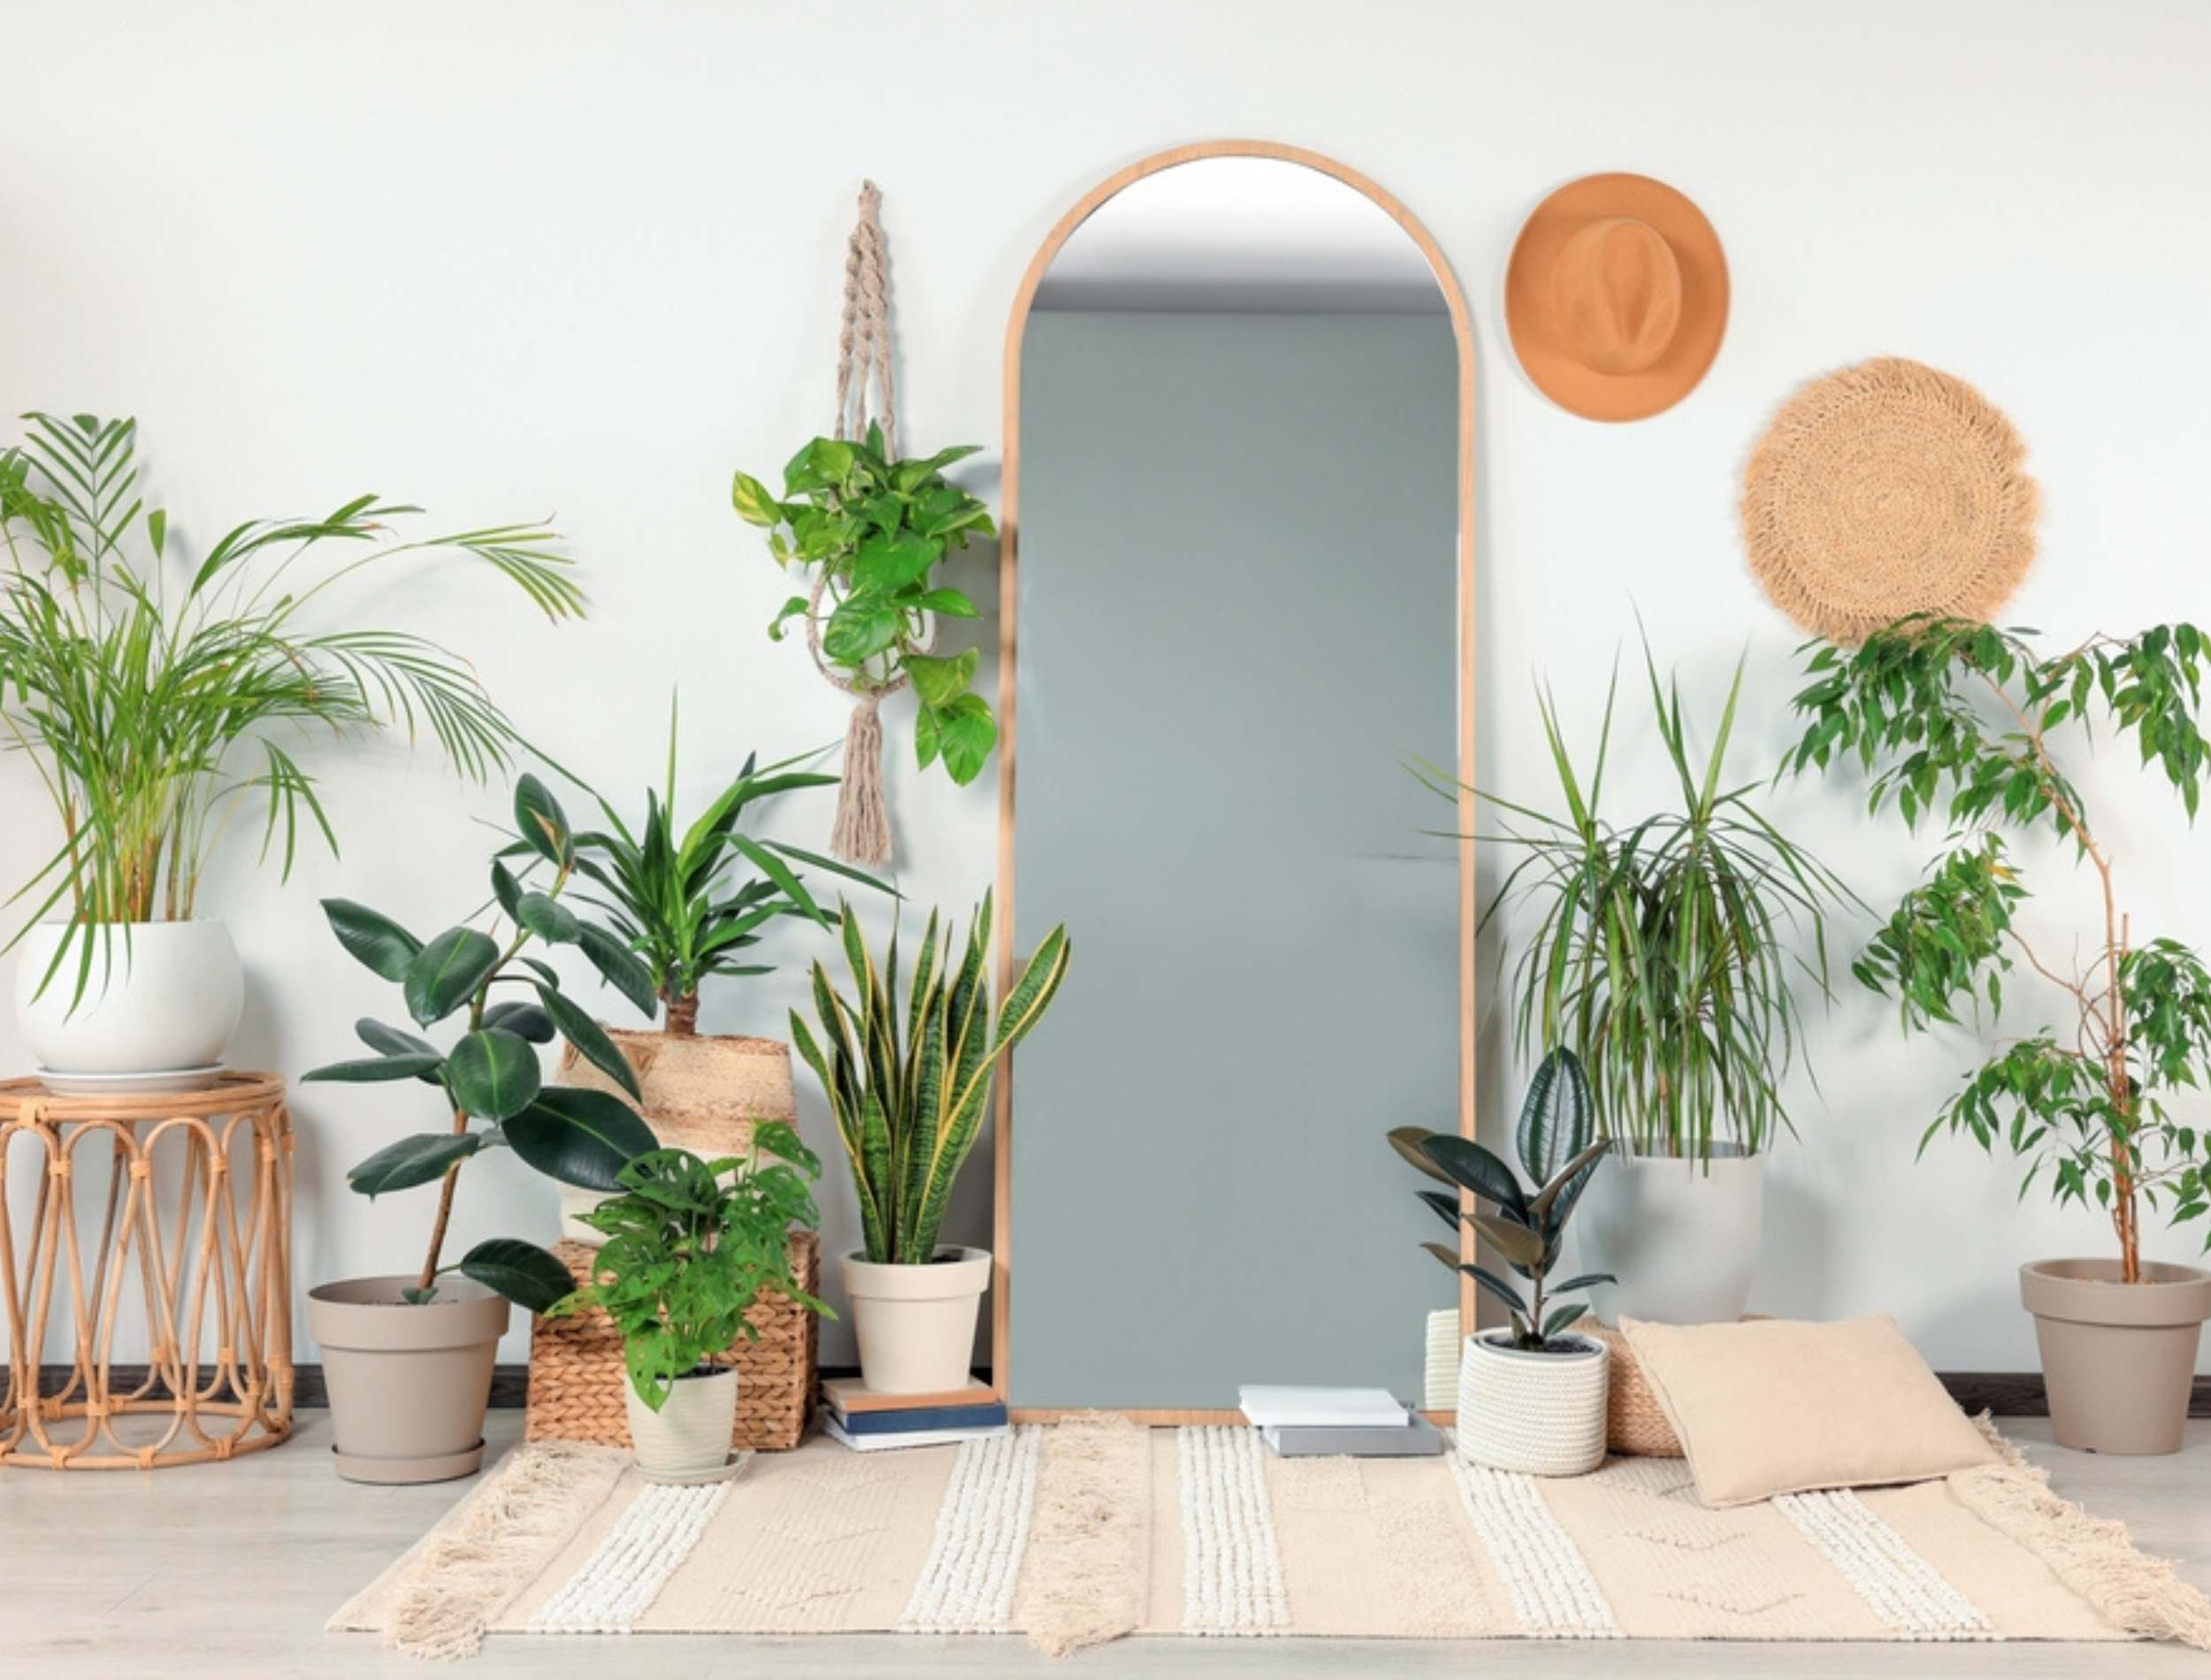 Stylish full length mirror and different houseplants near white wall in room